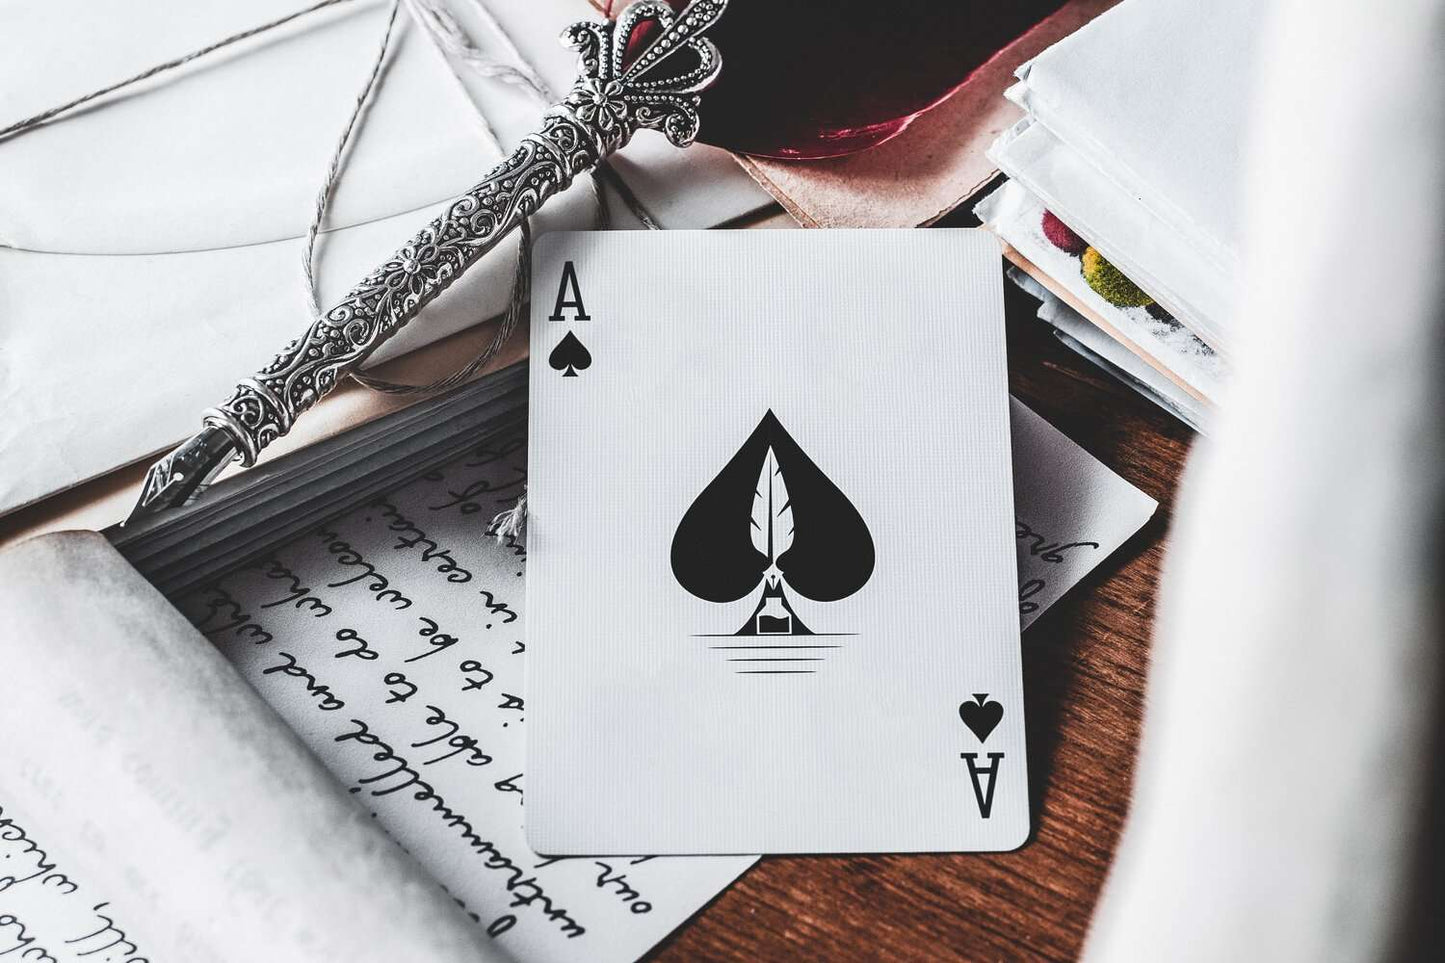 PlayingCardDecks.com-Chapter One Playing Cards USPCC